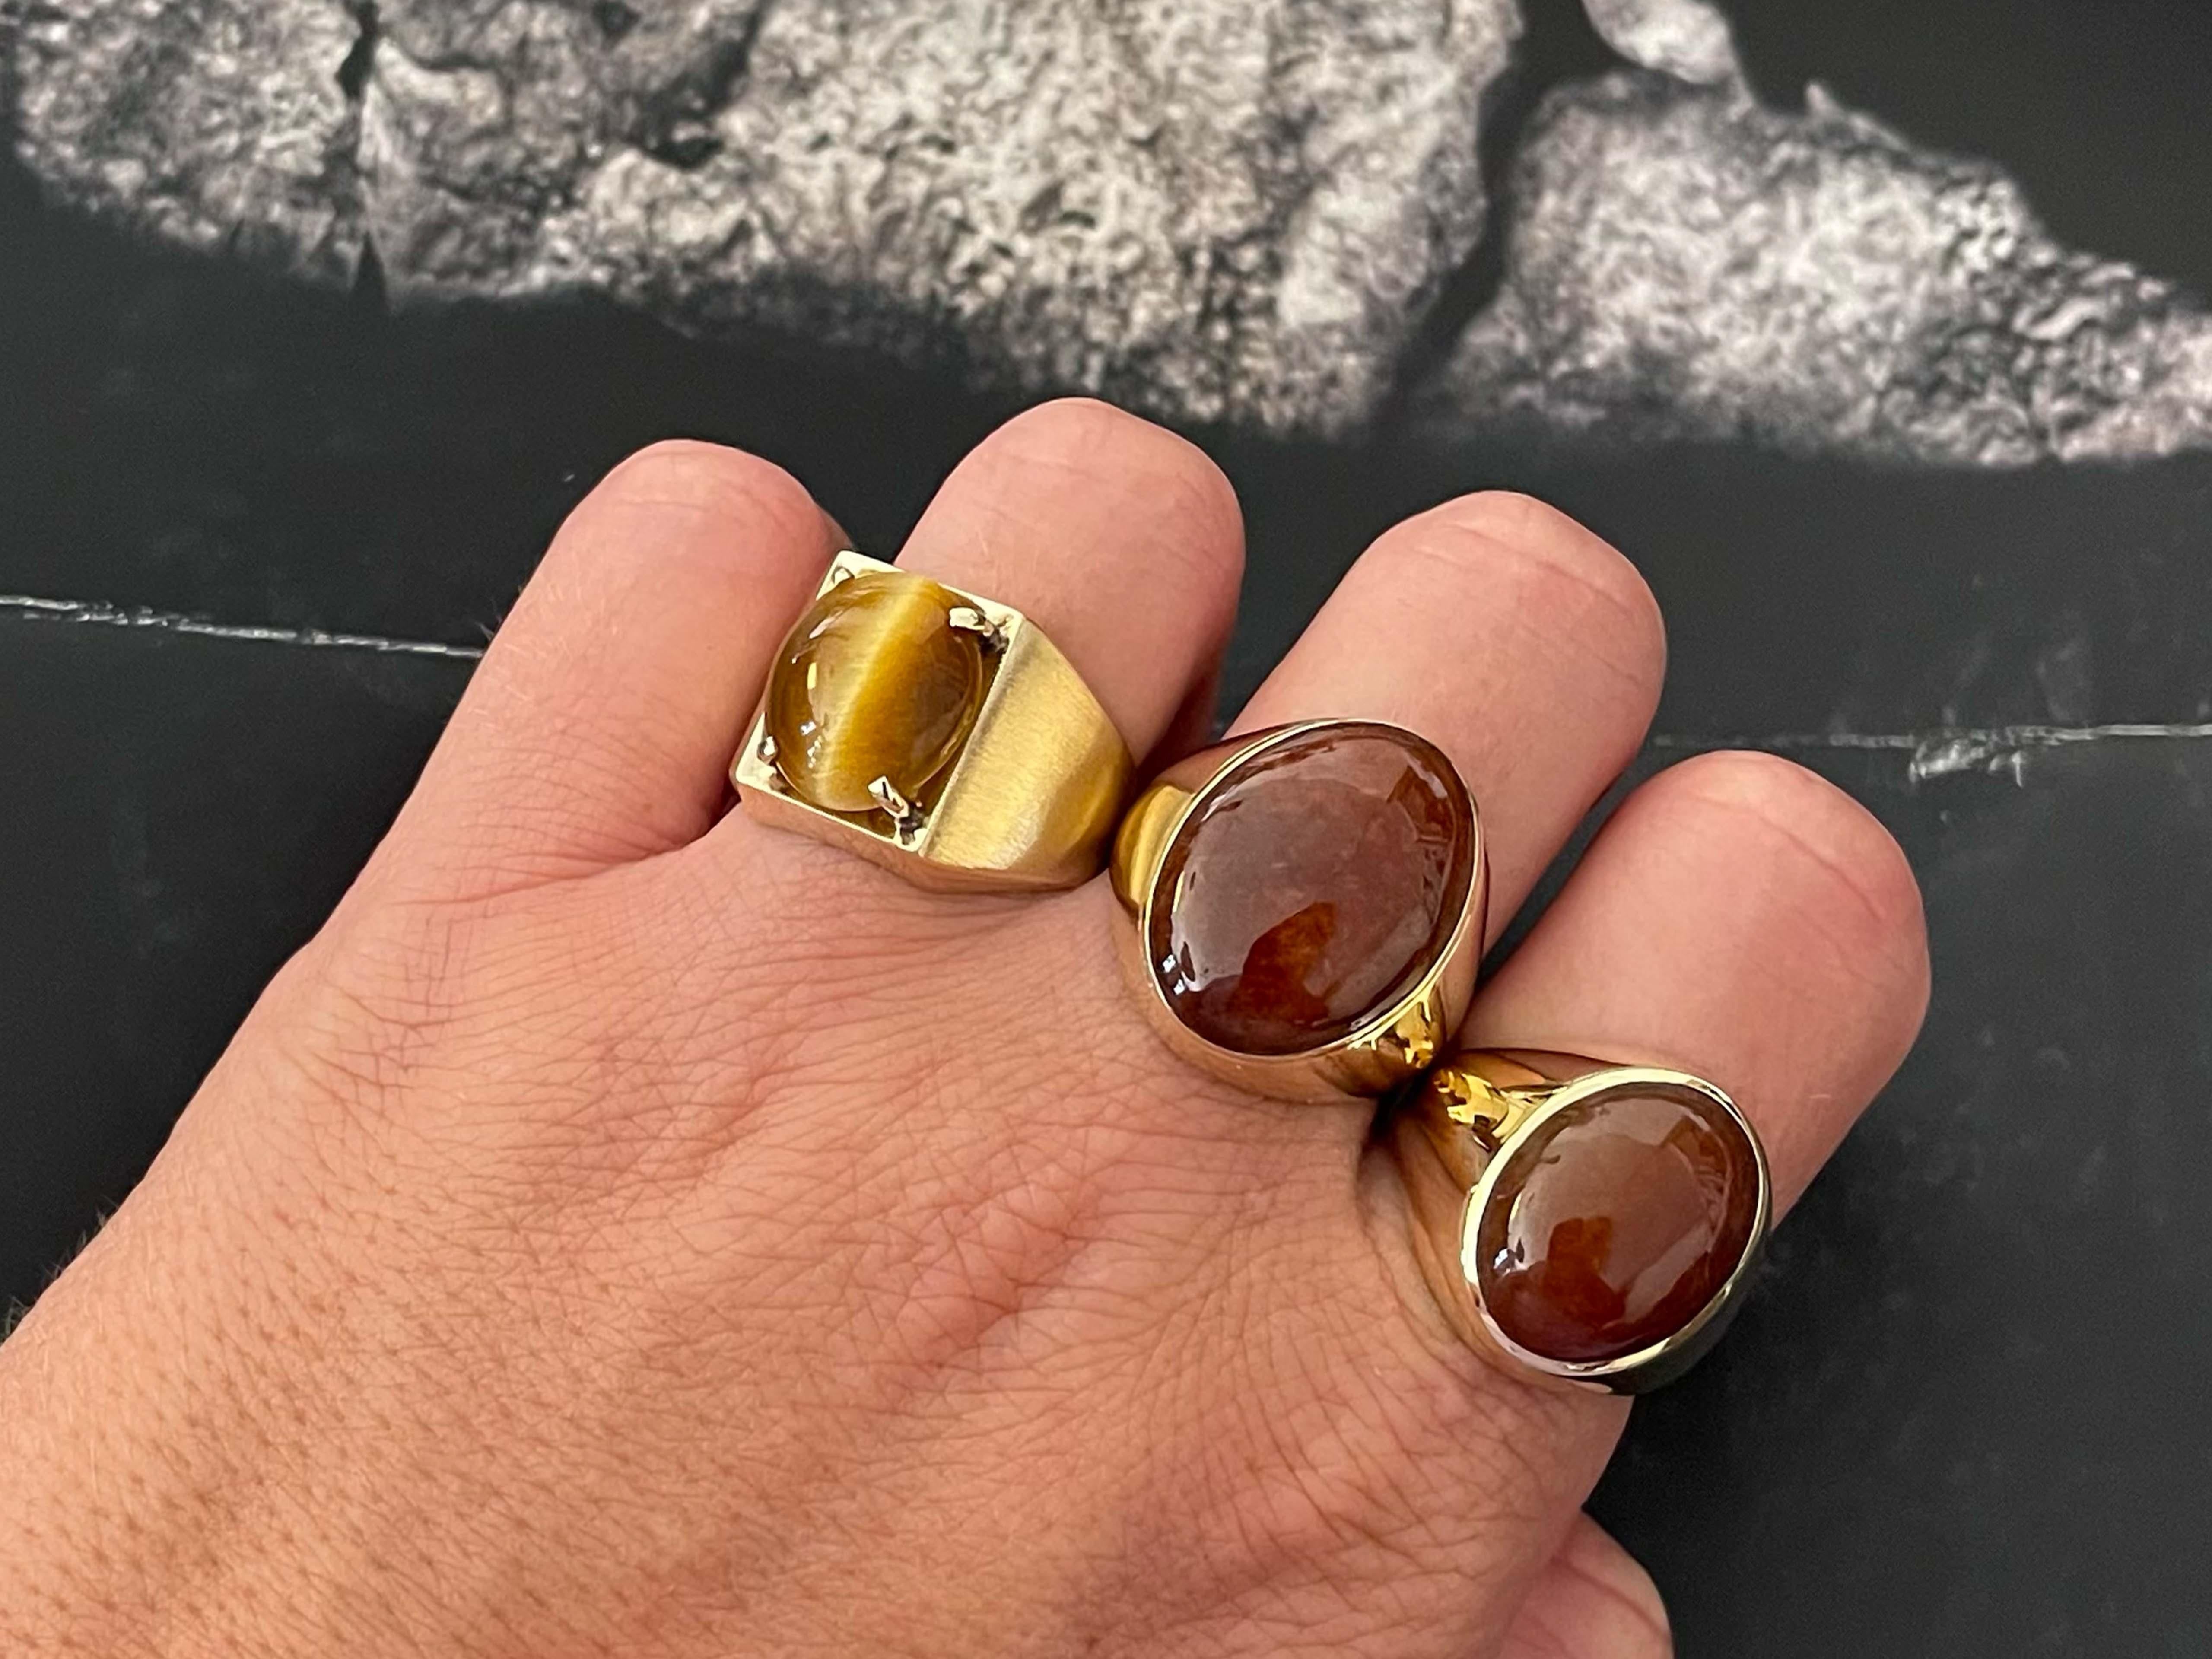 ​**Ring is on middle finger in hand photo**
​
​Ring Specifications:

Metal: 14k Yellow Gold

Total Weight: 11 Grams

Jade Carat Weight: ~12 carats

Jade Measurements: 20.2 mm x 14.7 mm x 4.5 mm

Ring Size: 9 (resizable)

Stamped: 